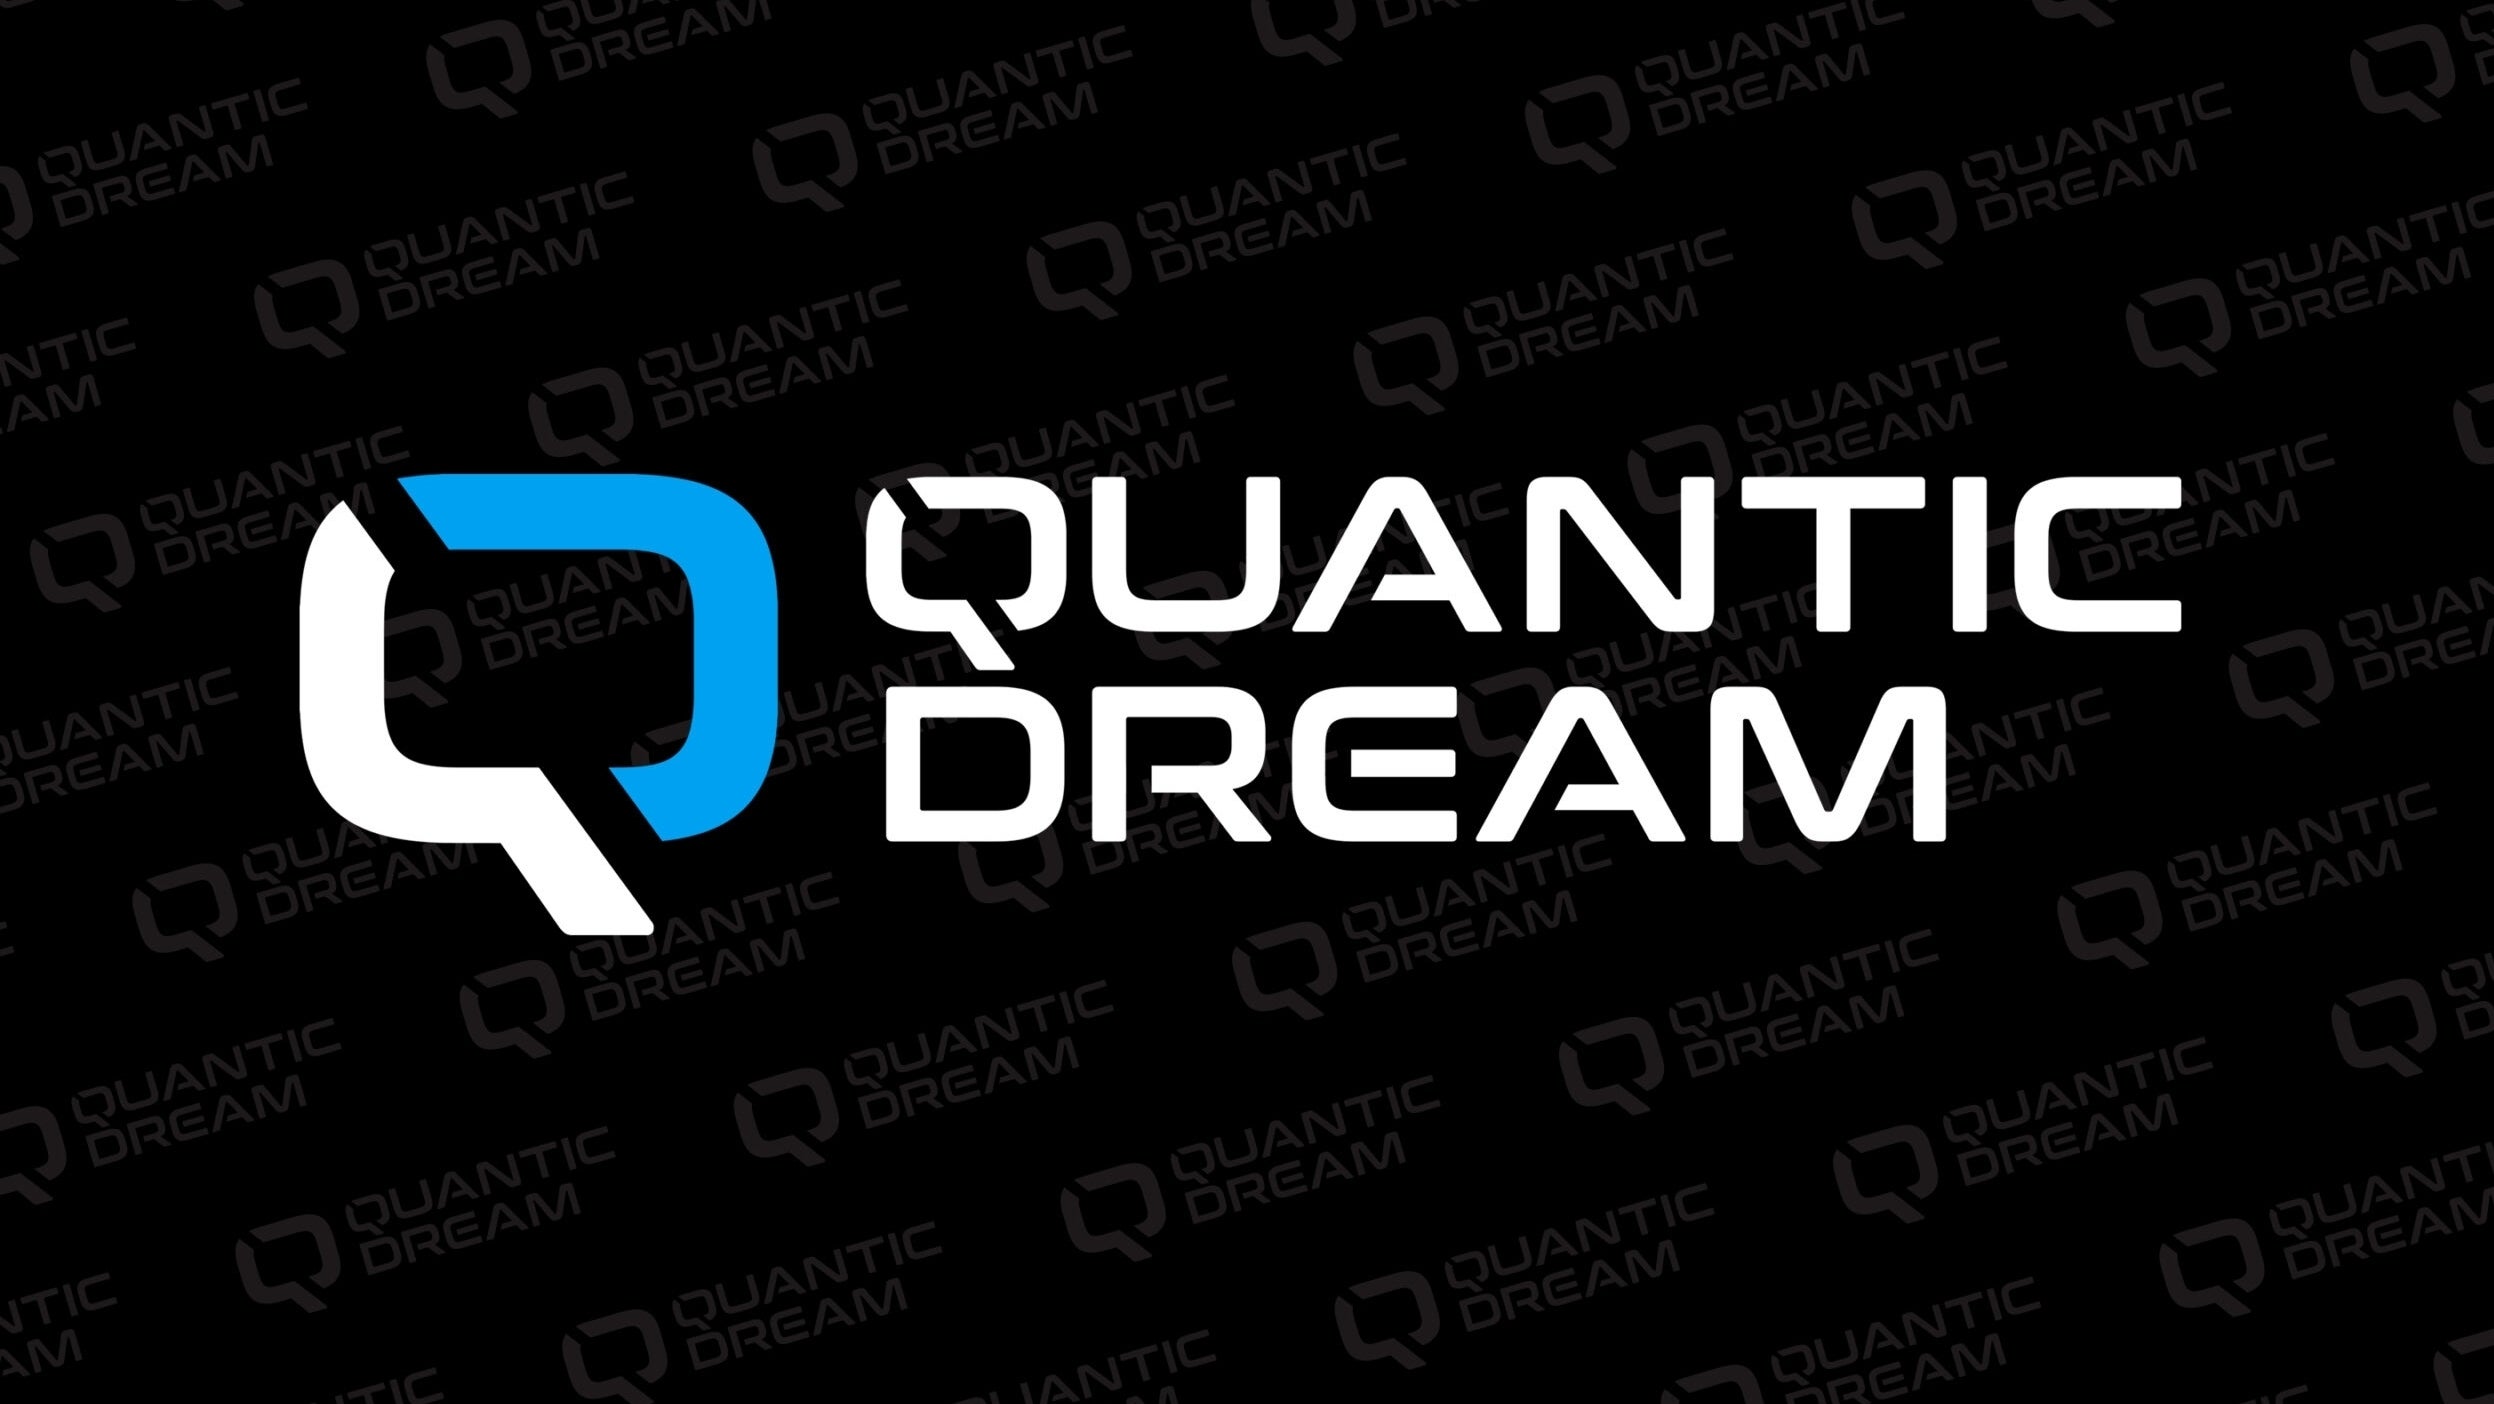 Image for Quantic Dream bosses successfully sue French newspaper Le Monde for libel